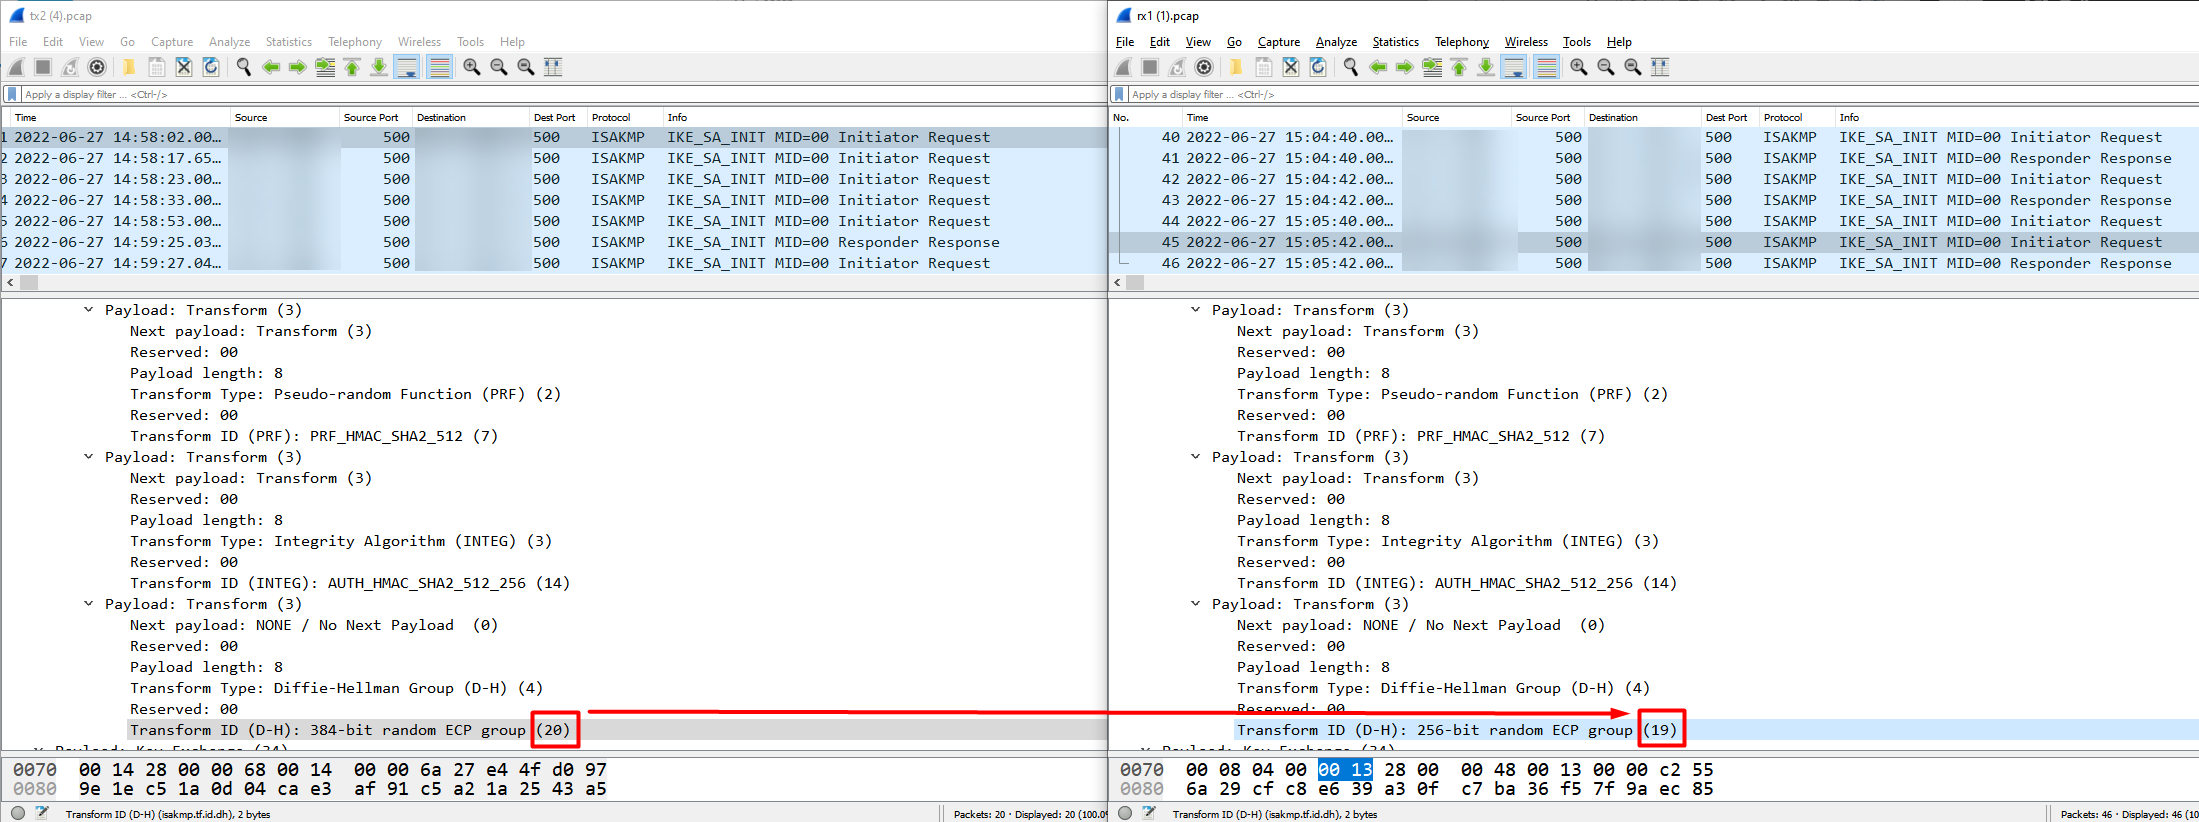 Comparing Wireshark for Phase 1 DH Group mismatch